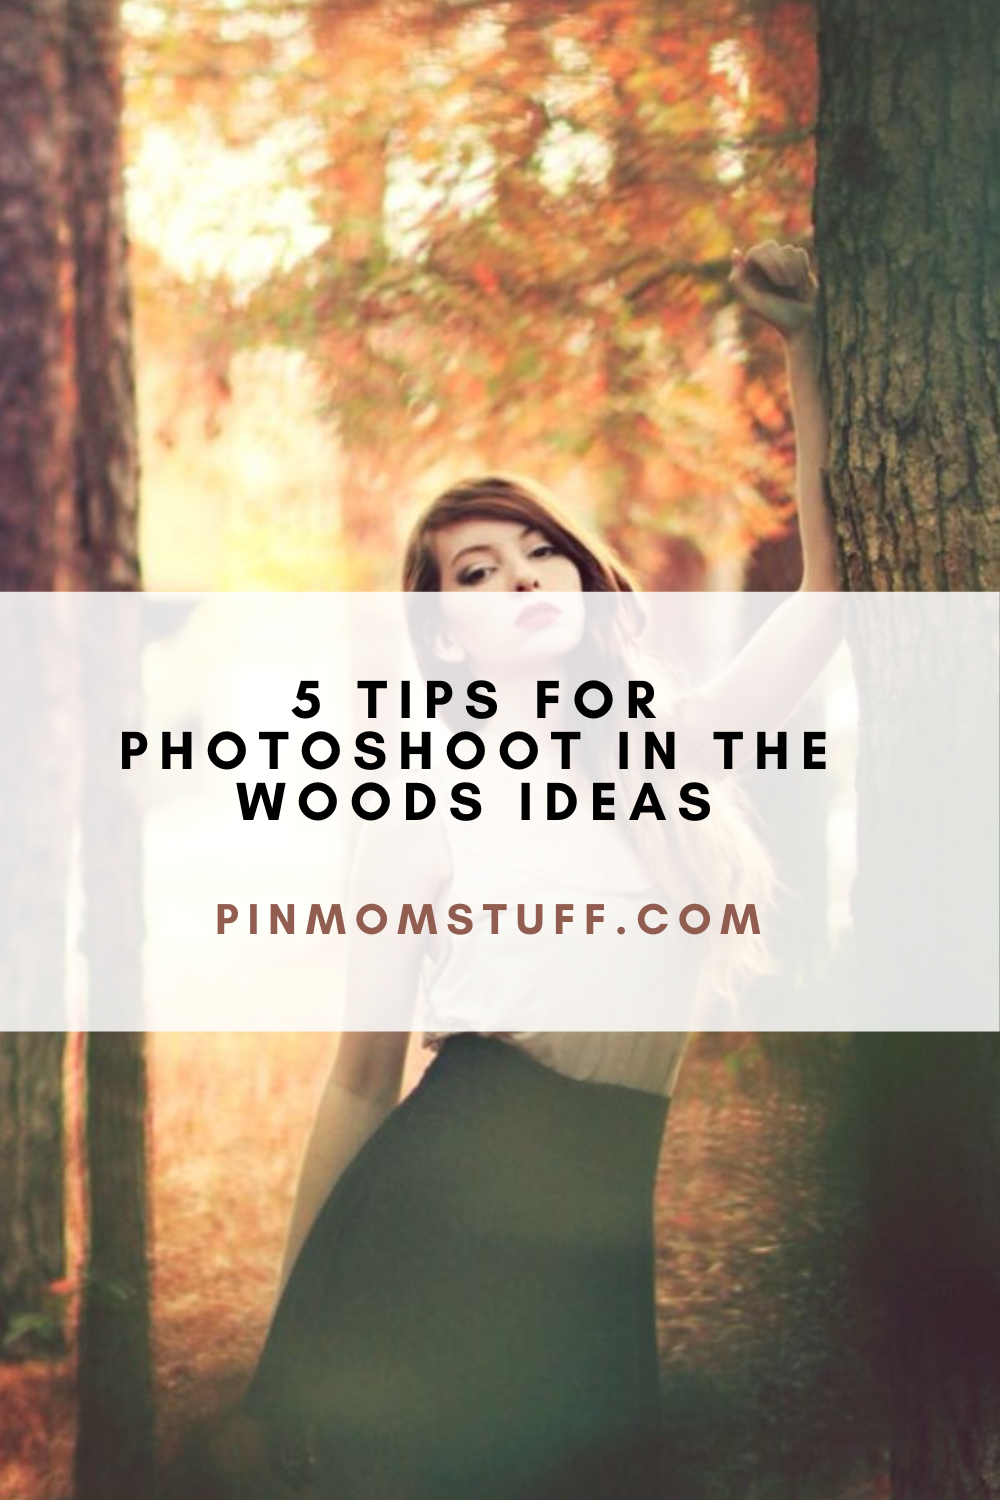 5 Tips For Photoshoot In The Woods Ideas 